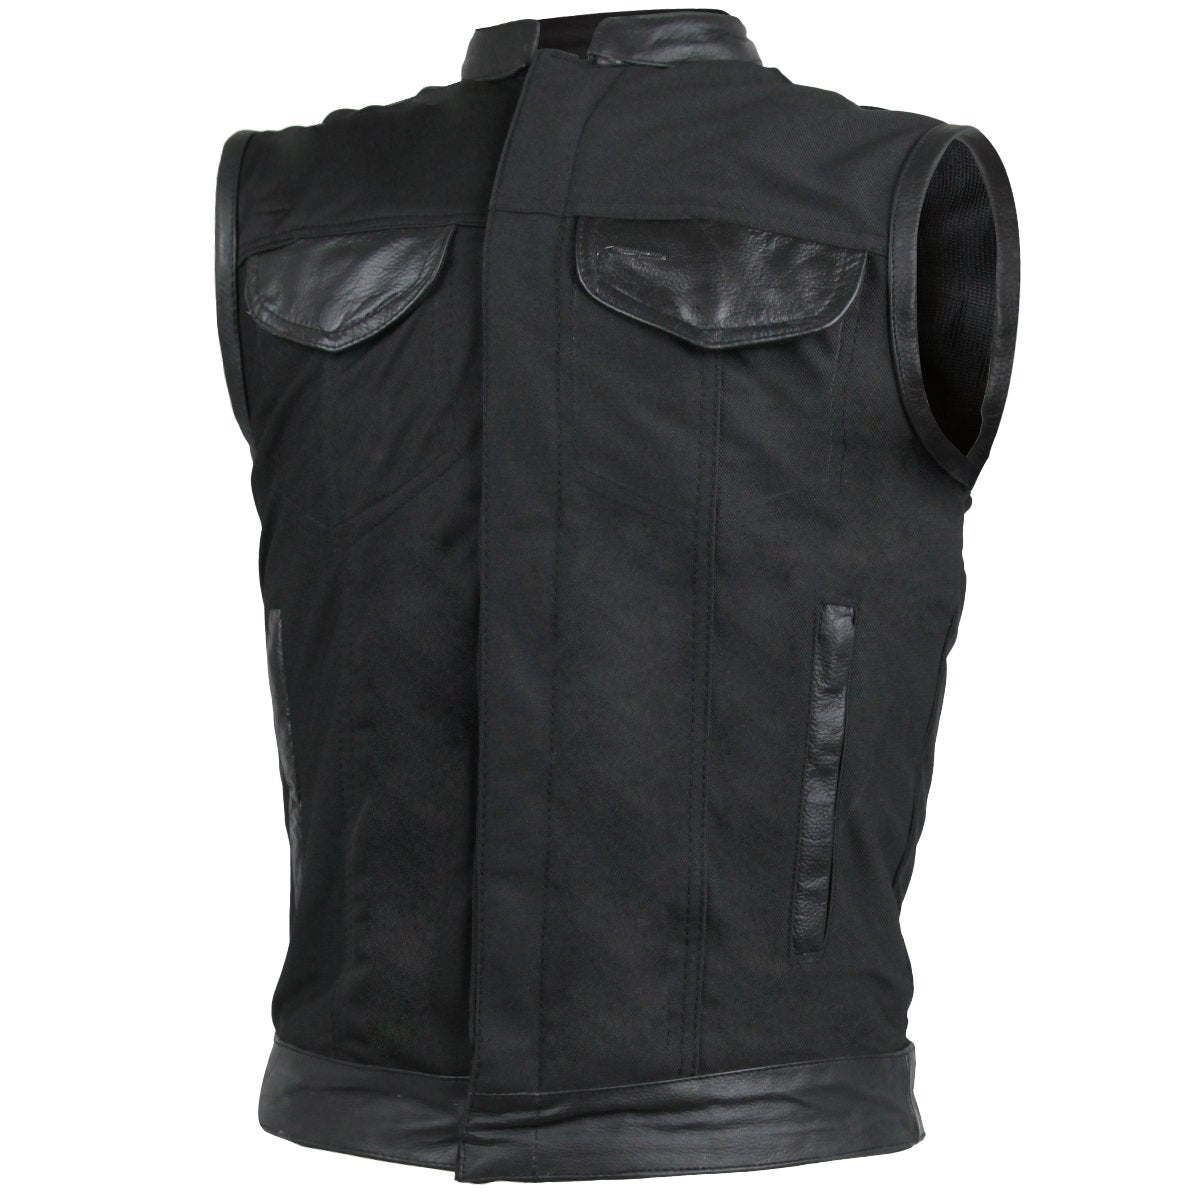 Vance Leather Heavy Duty Textile Club Vest with Leather Accents, Snaps, and Zipper Closure